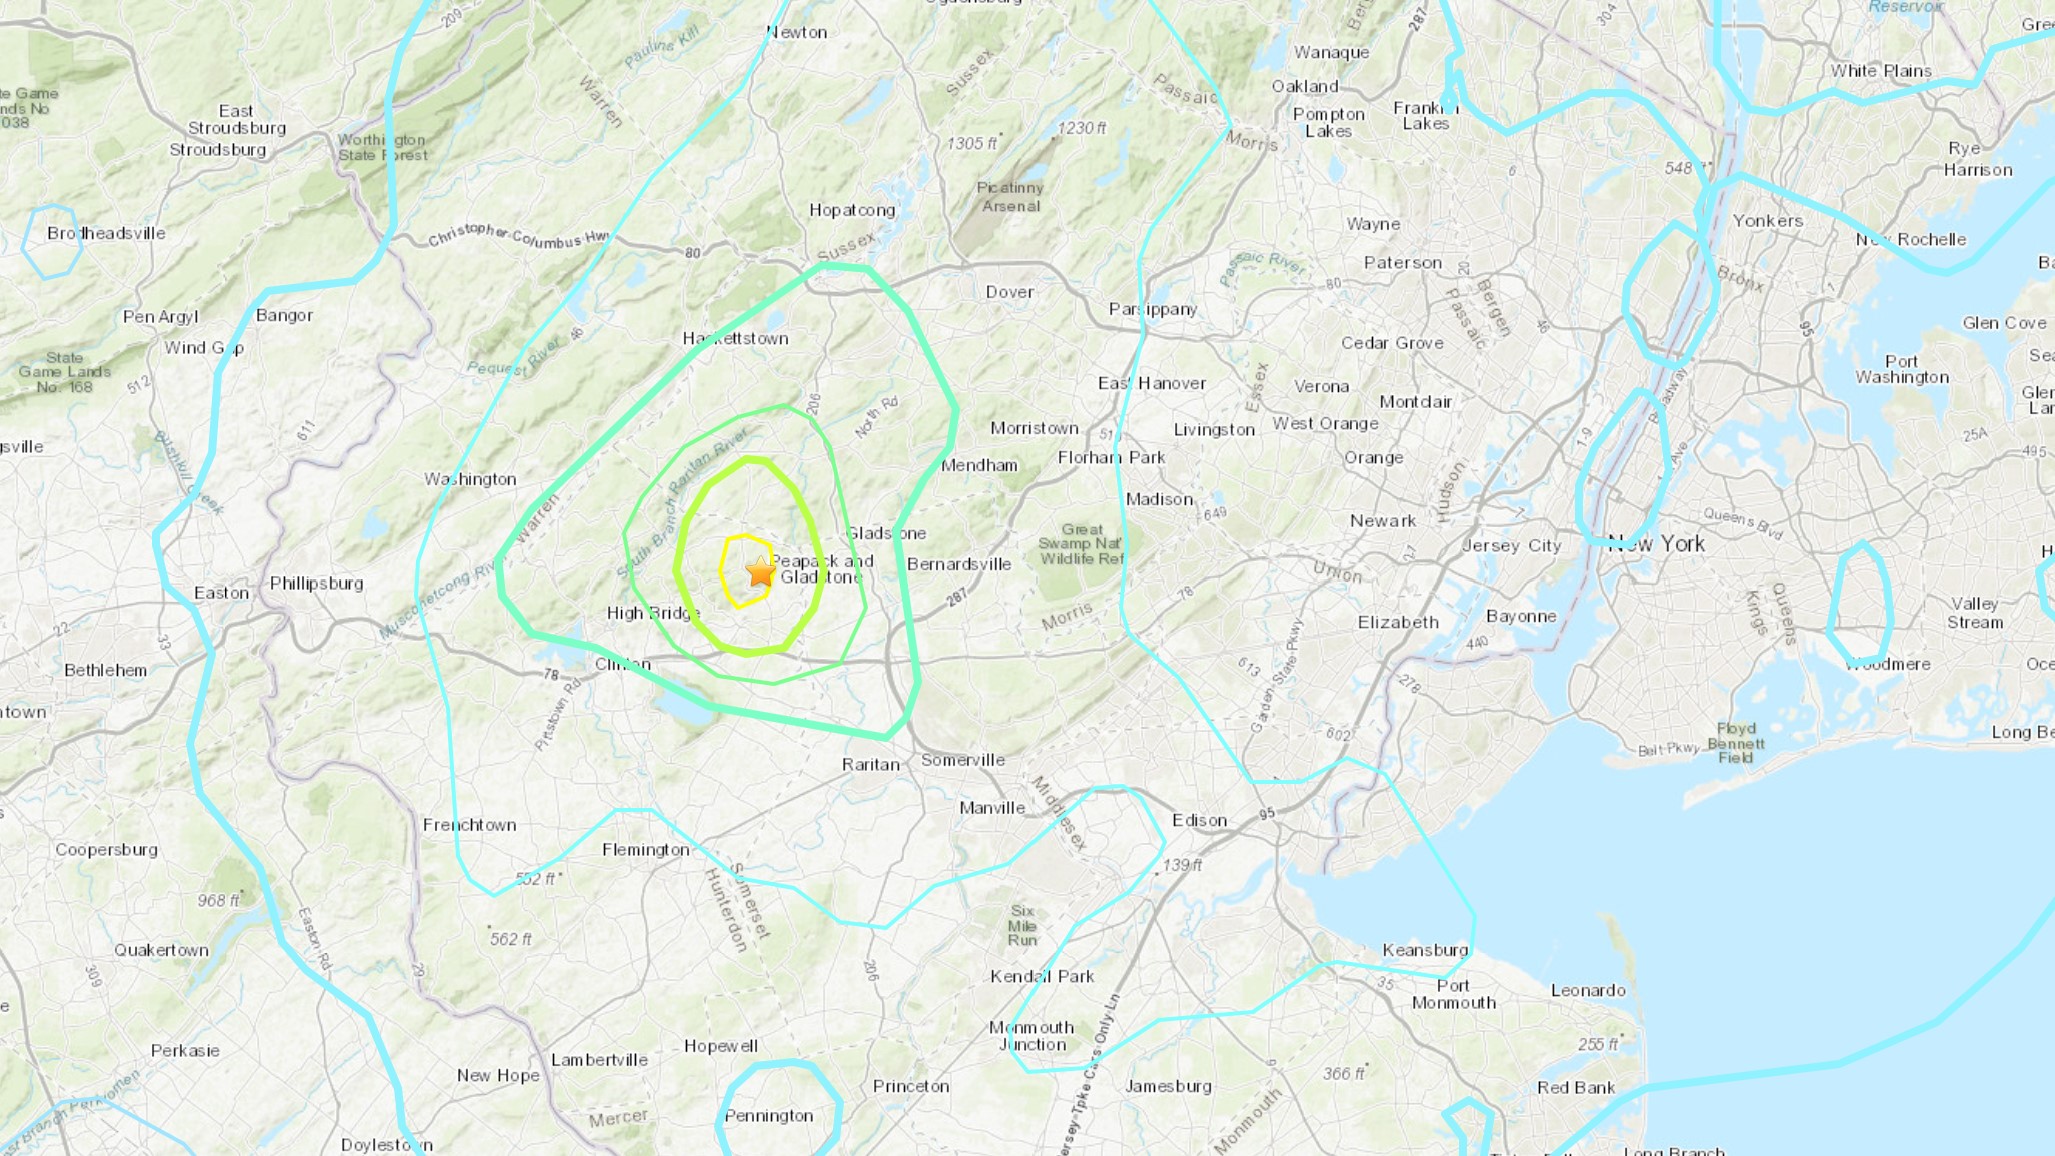 Map of the epicenter of the earthquake in New Jersey and the range of the tremors stretching into New York City.